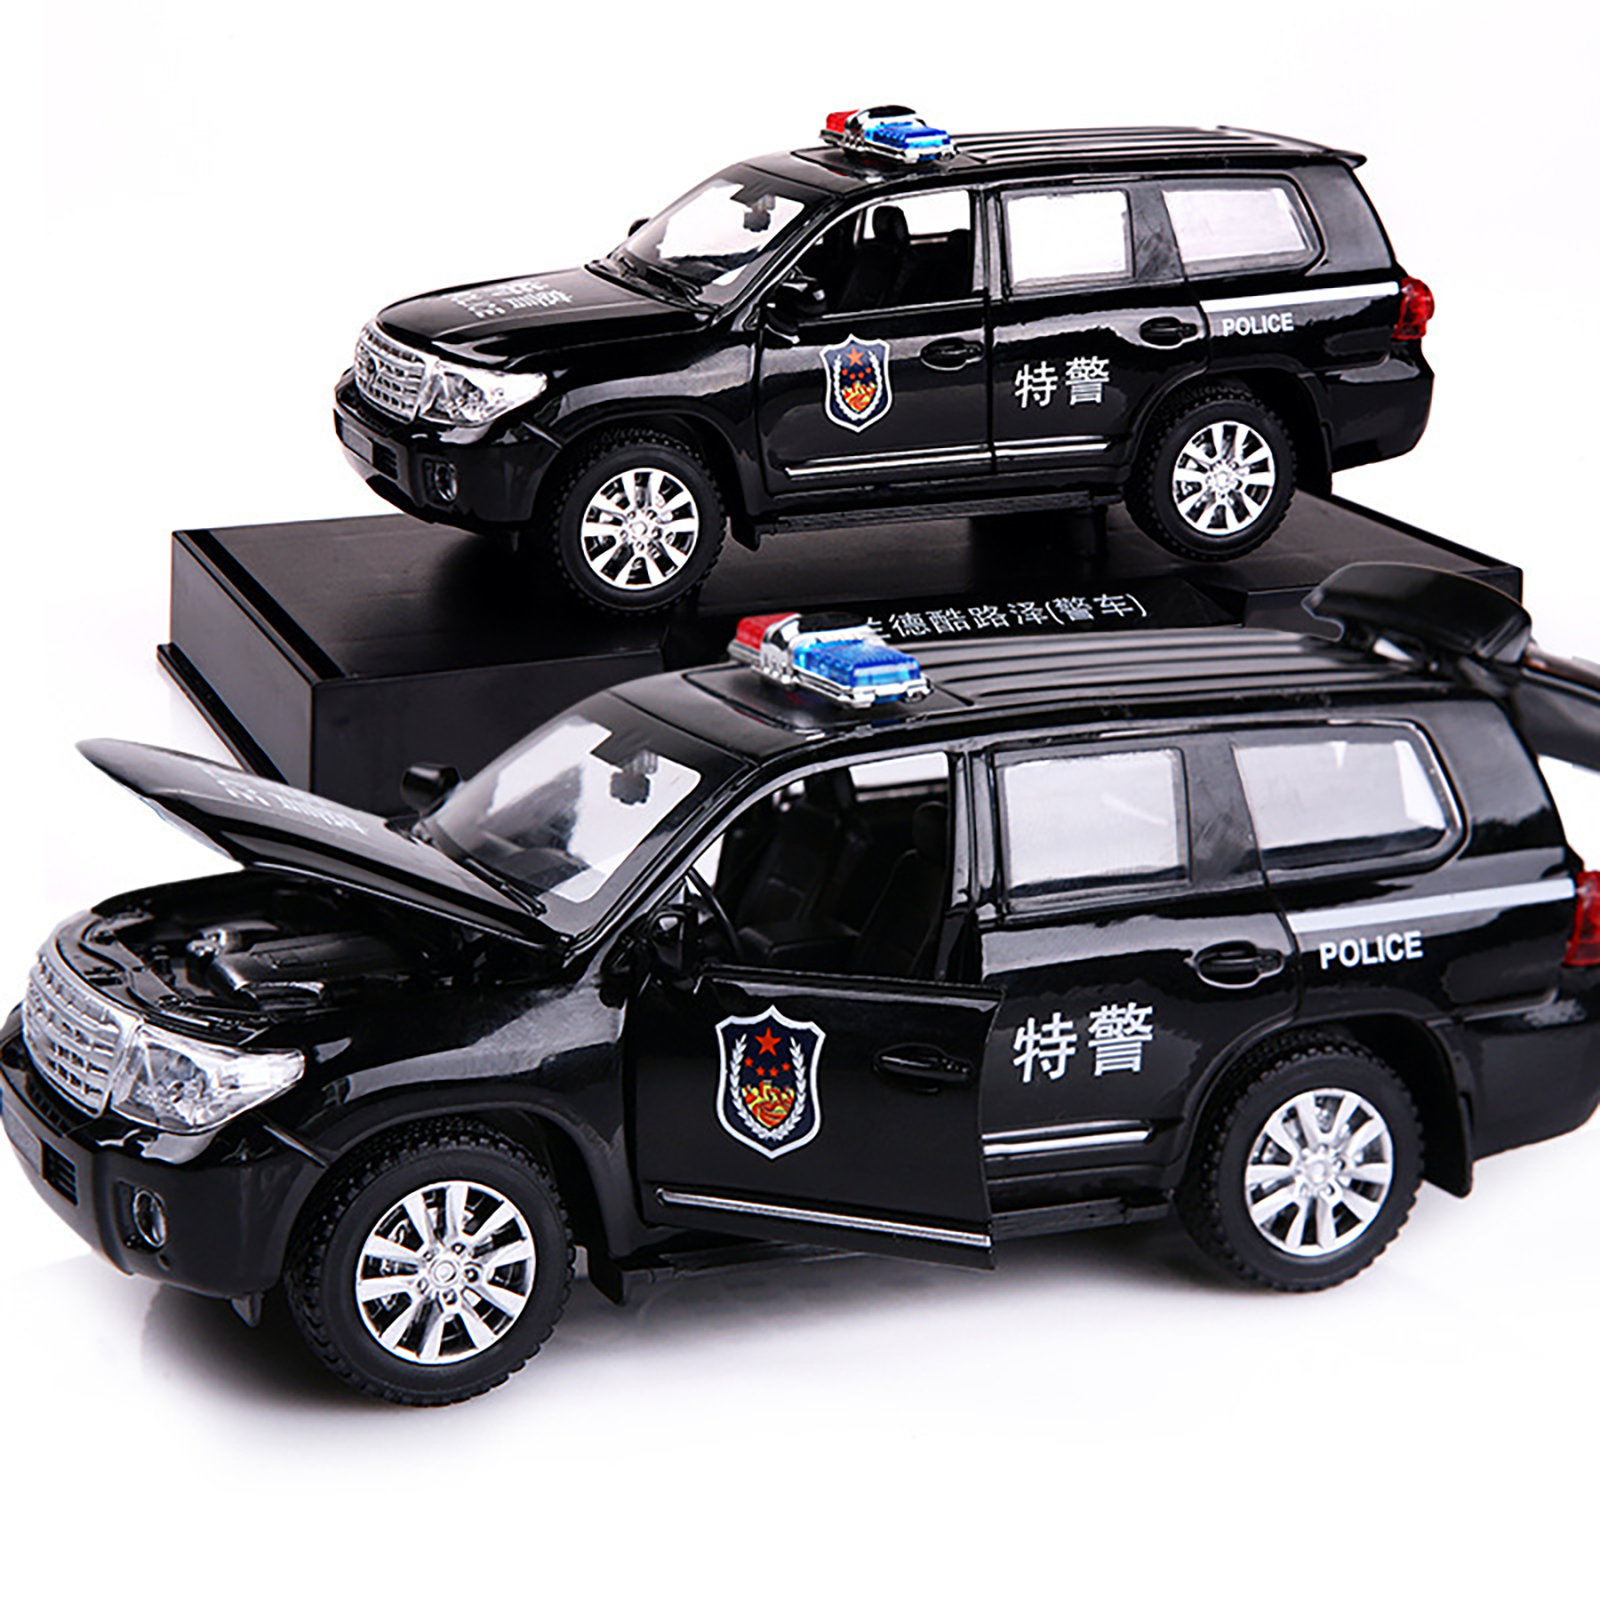 Simulation Alloy Police Car With Light Sound Openable Door Diecast Pull Back Vehicle Model With Base Birthday Xmas Gifts For Kids